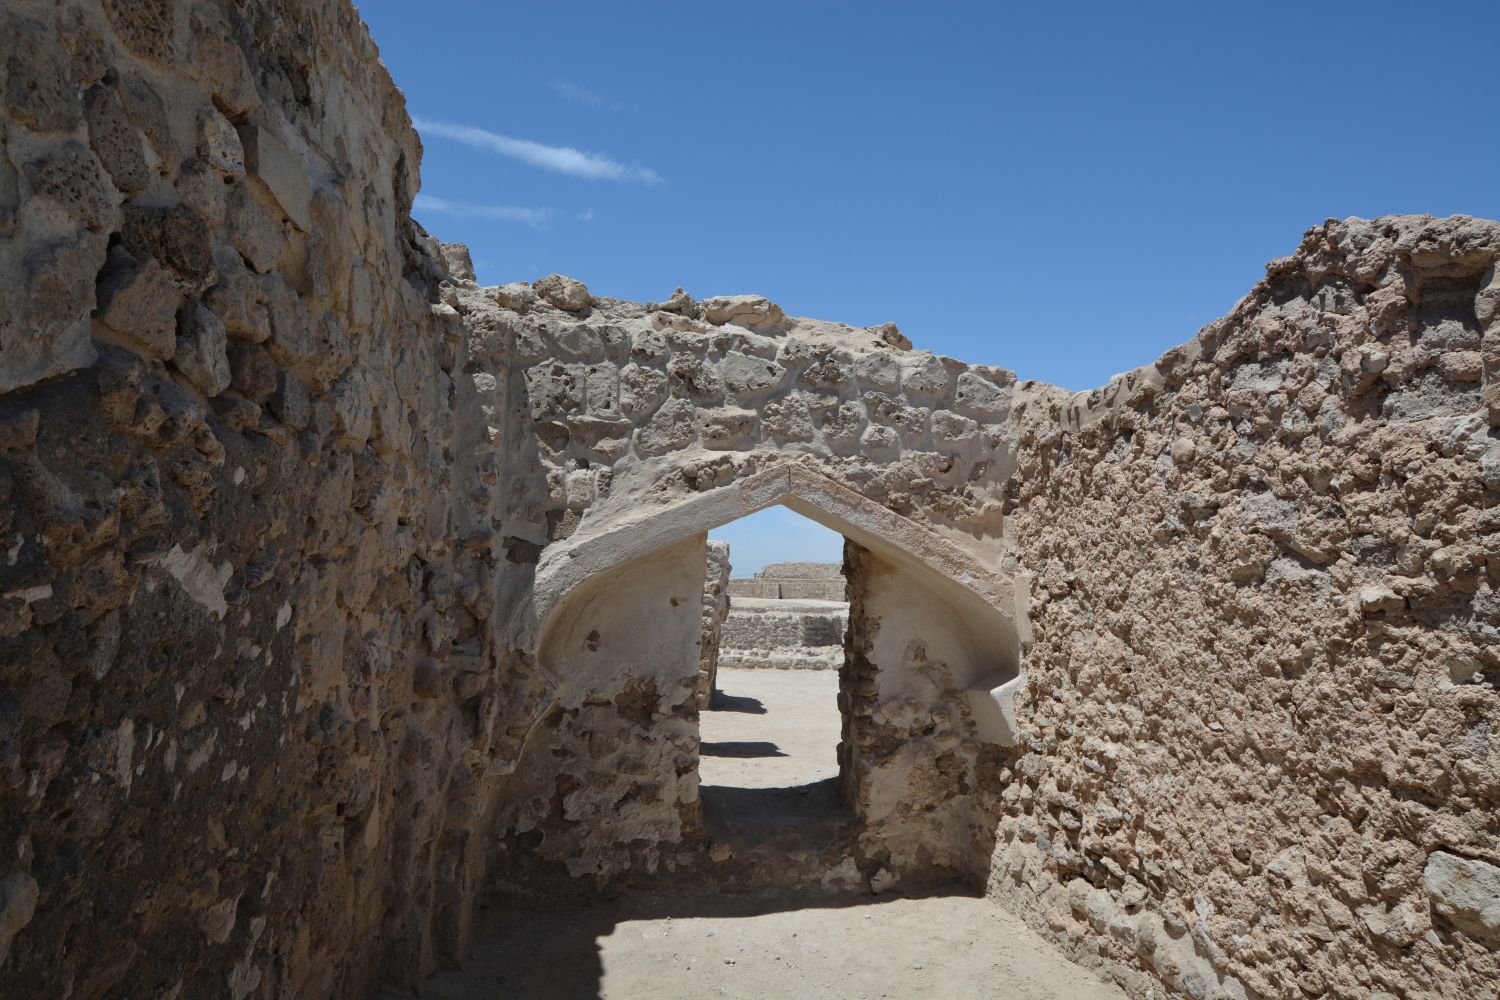 View from the archaeological site, showcasing a pointed arch.